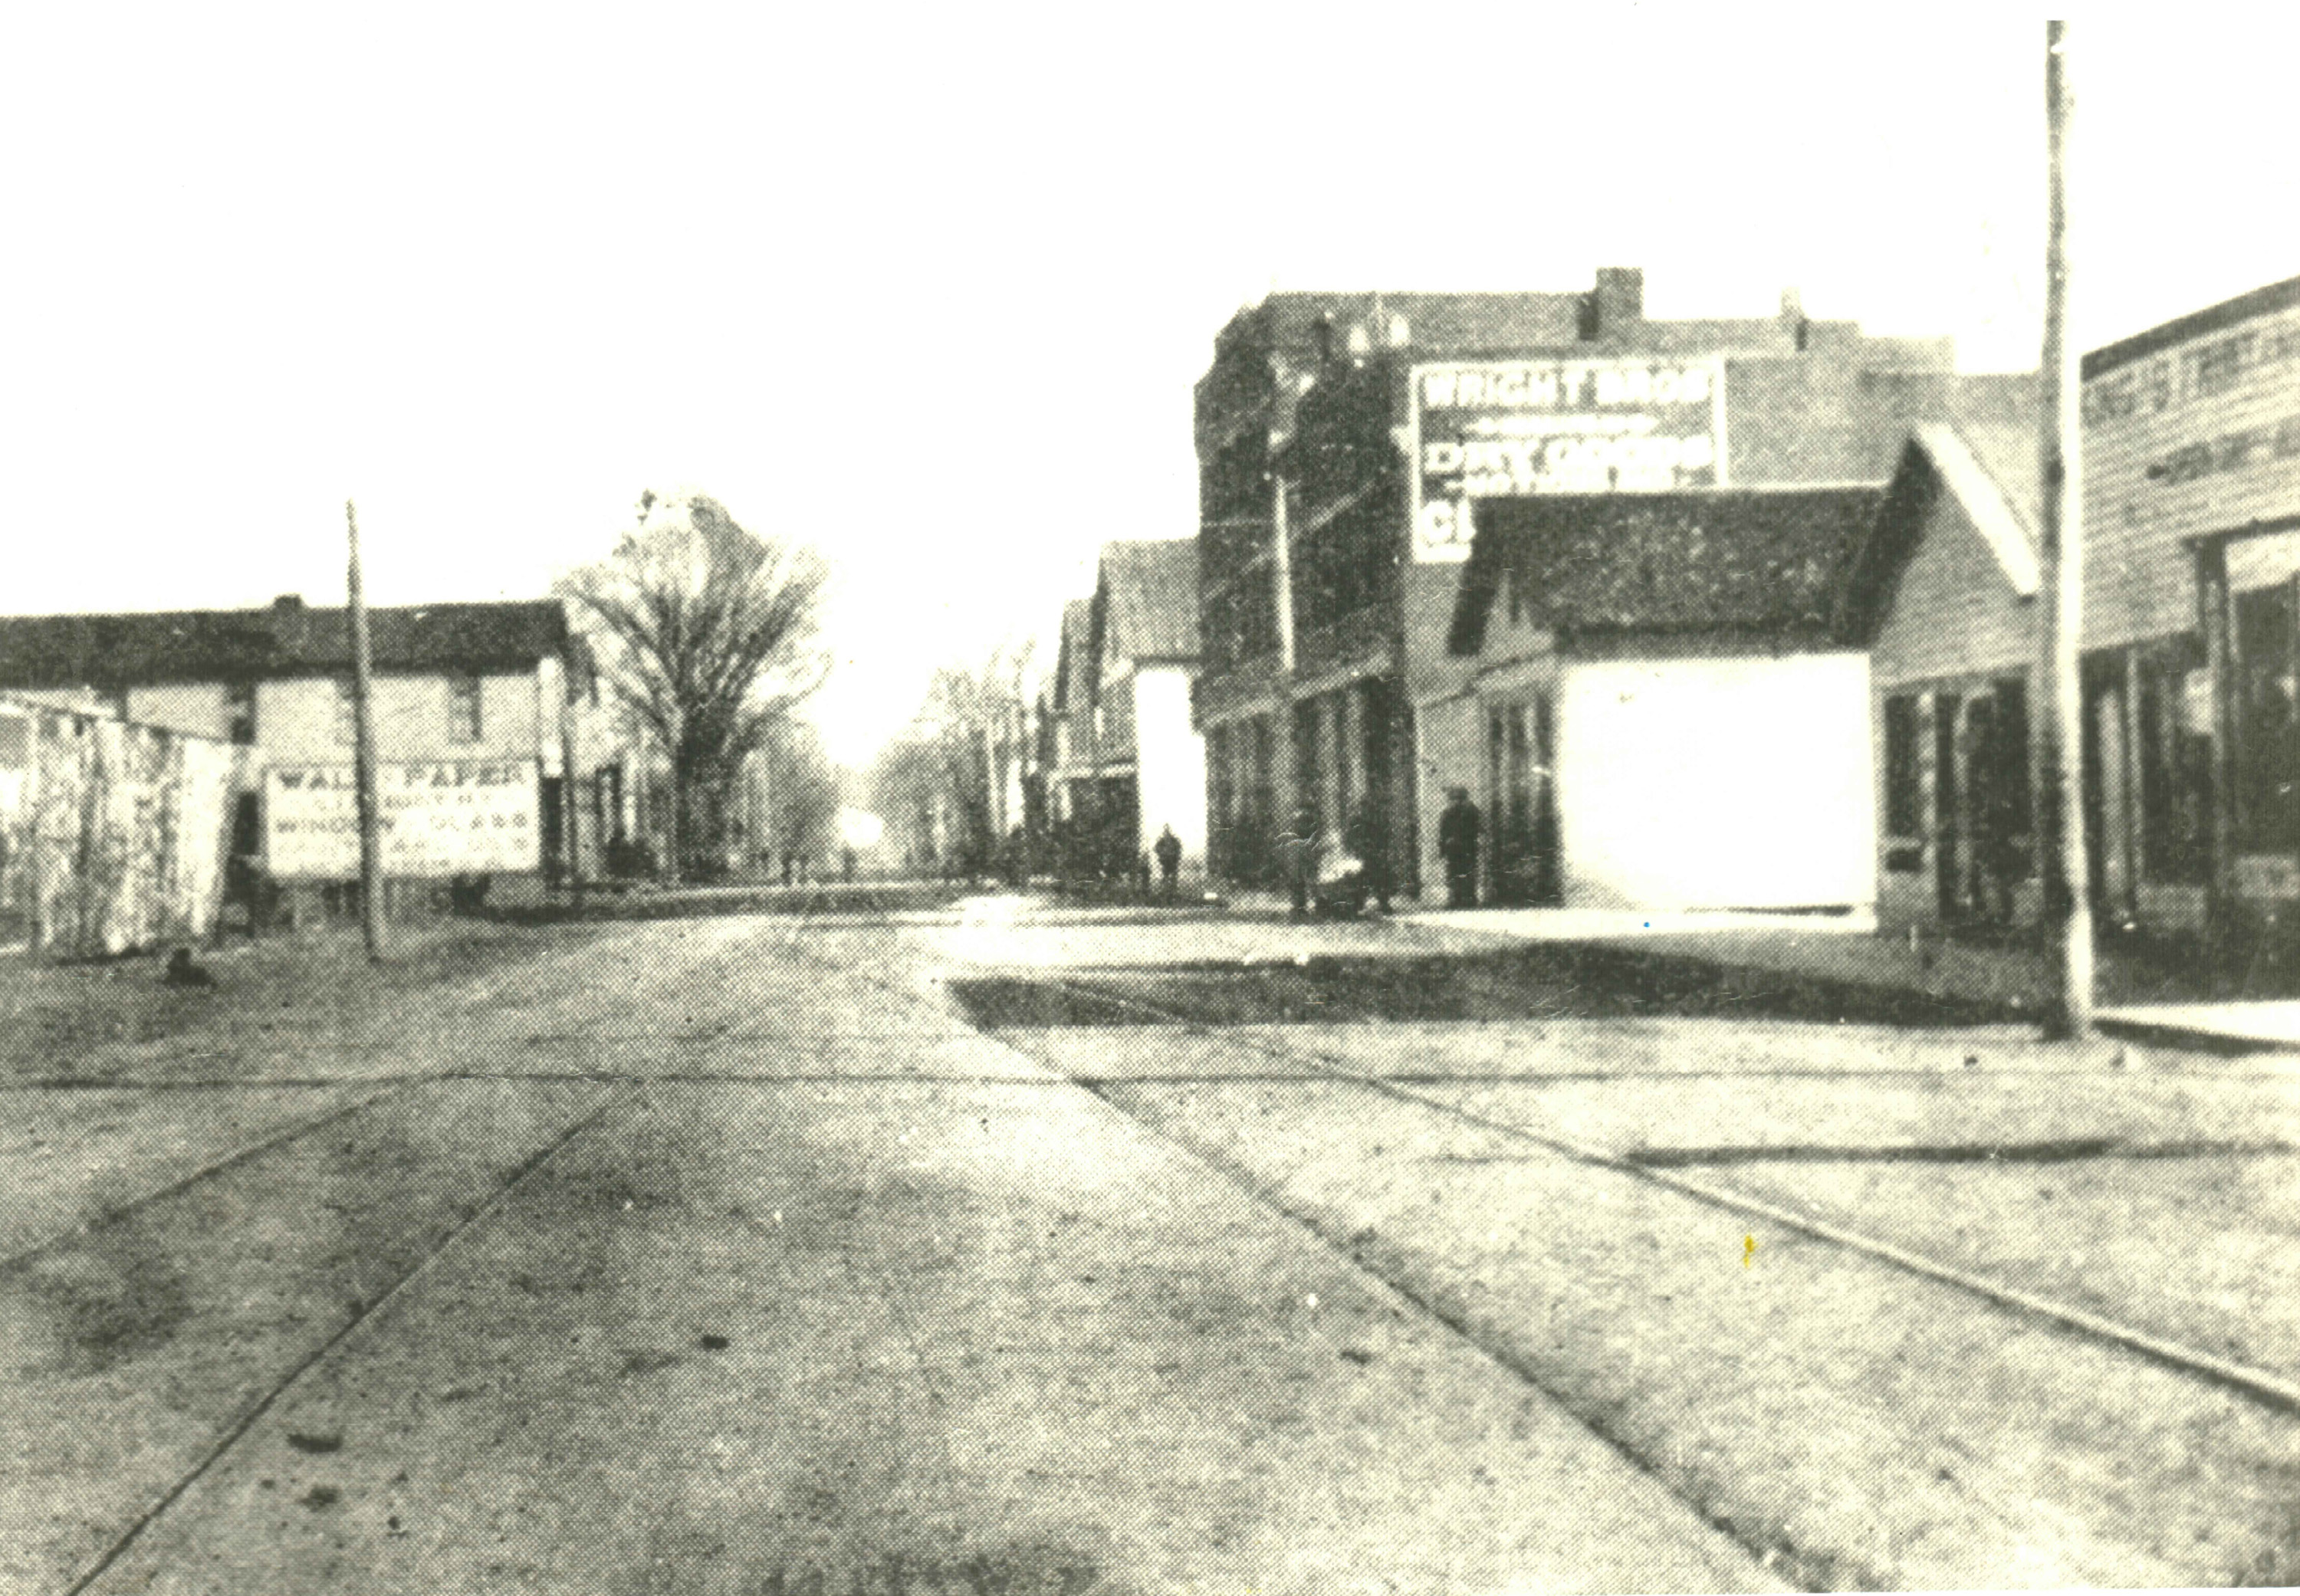 B Street in the early 1900s. The Wright Brothers Store can be seen on the right. 